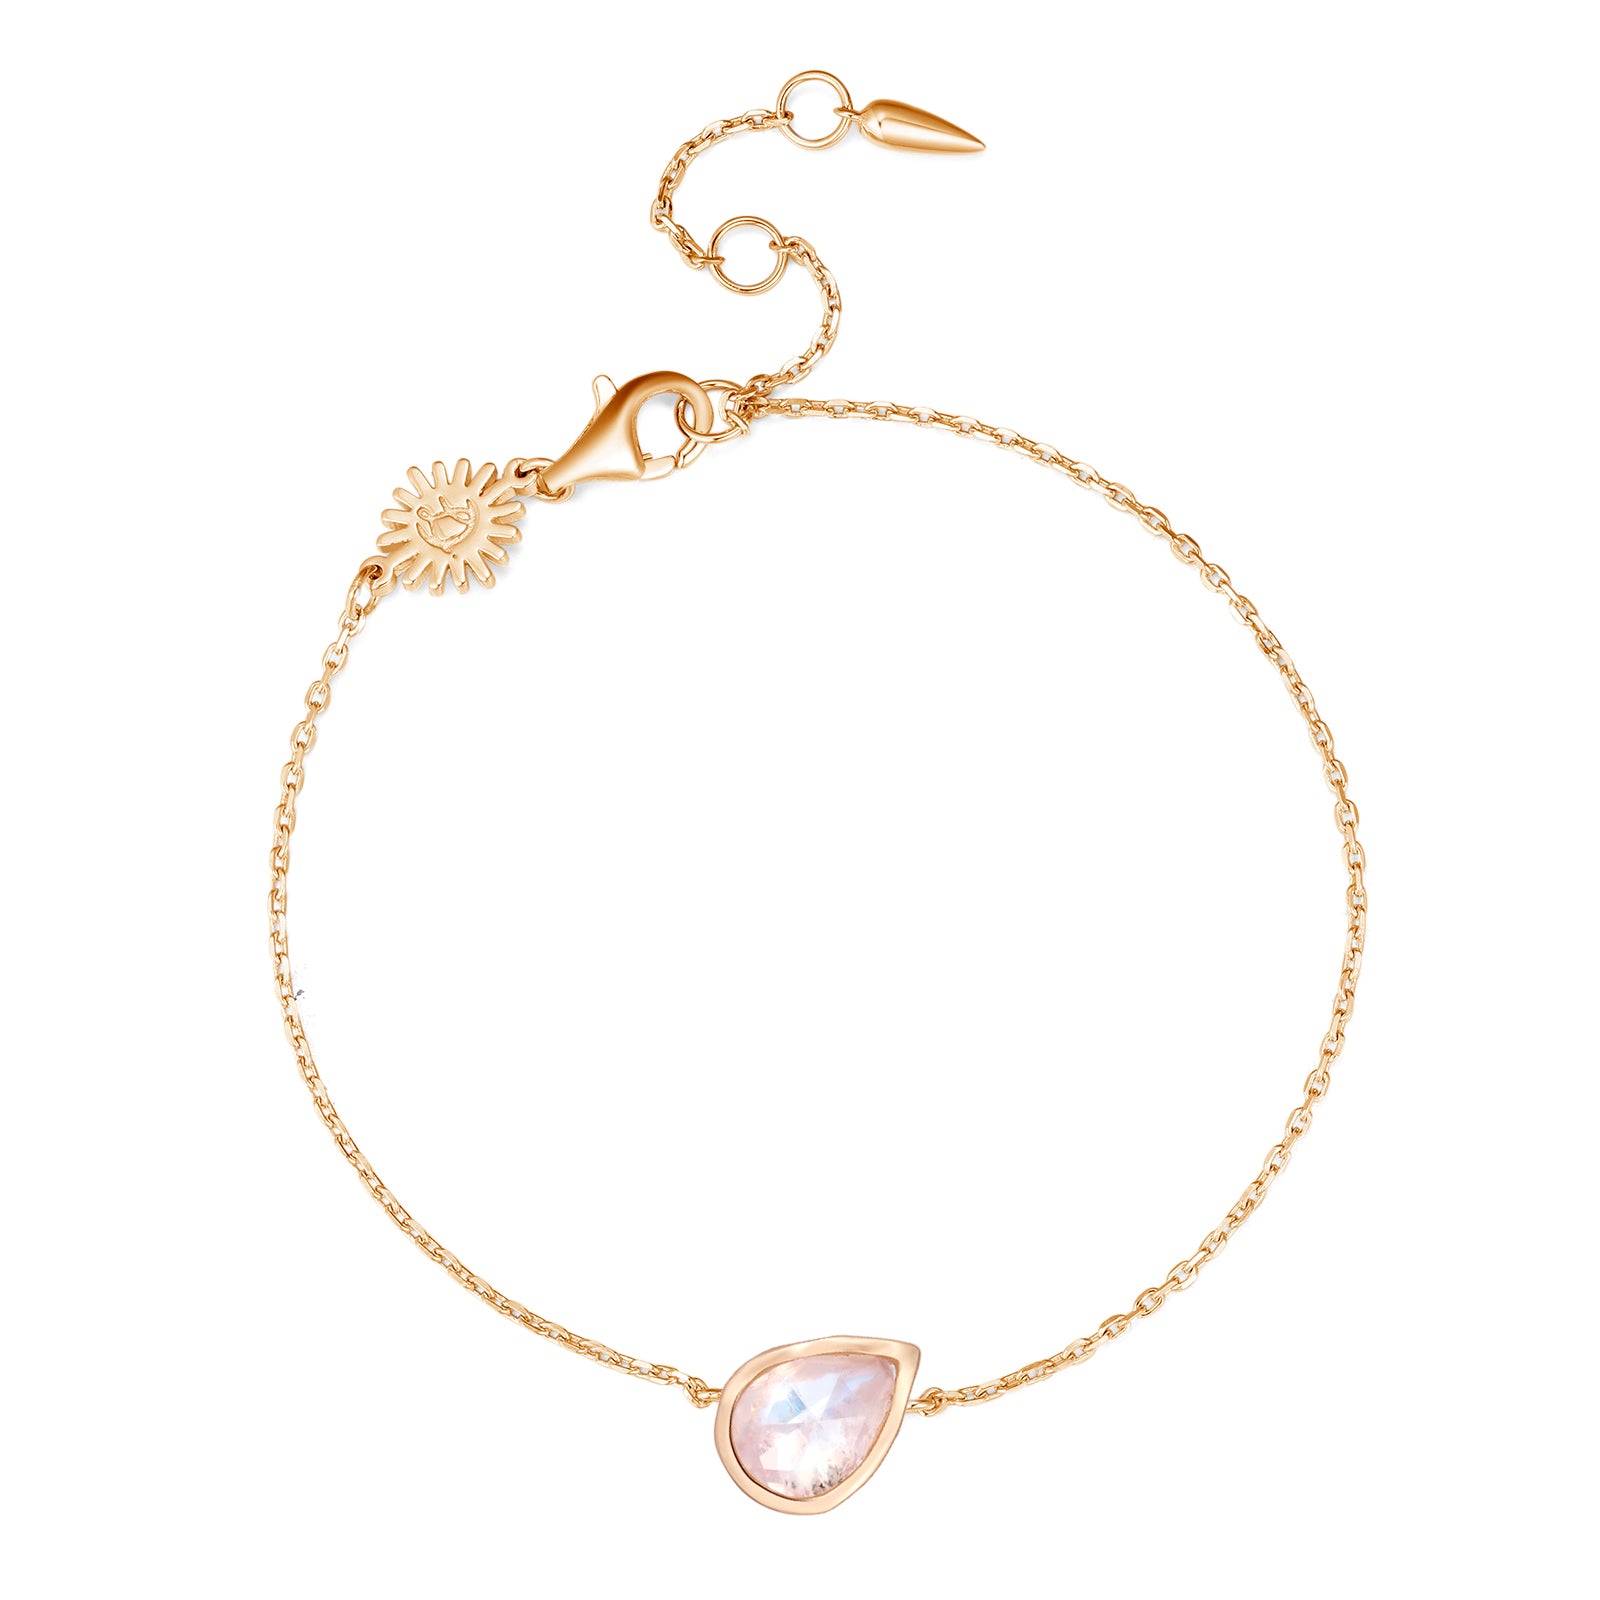 Moonstone Gold Dainty Bracelet - Lindy | LOVE BY THE MOON